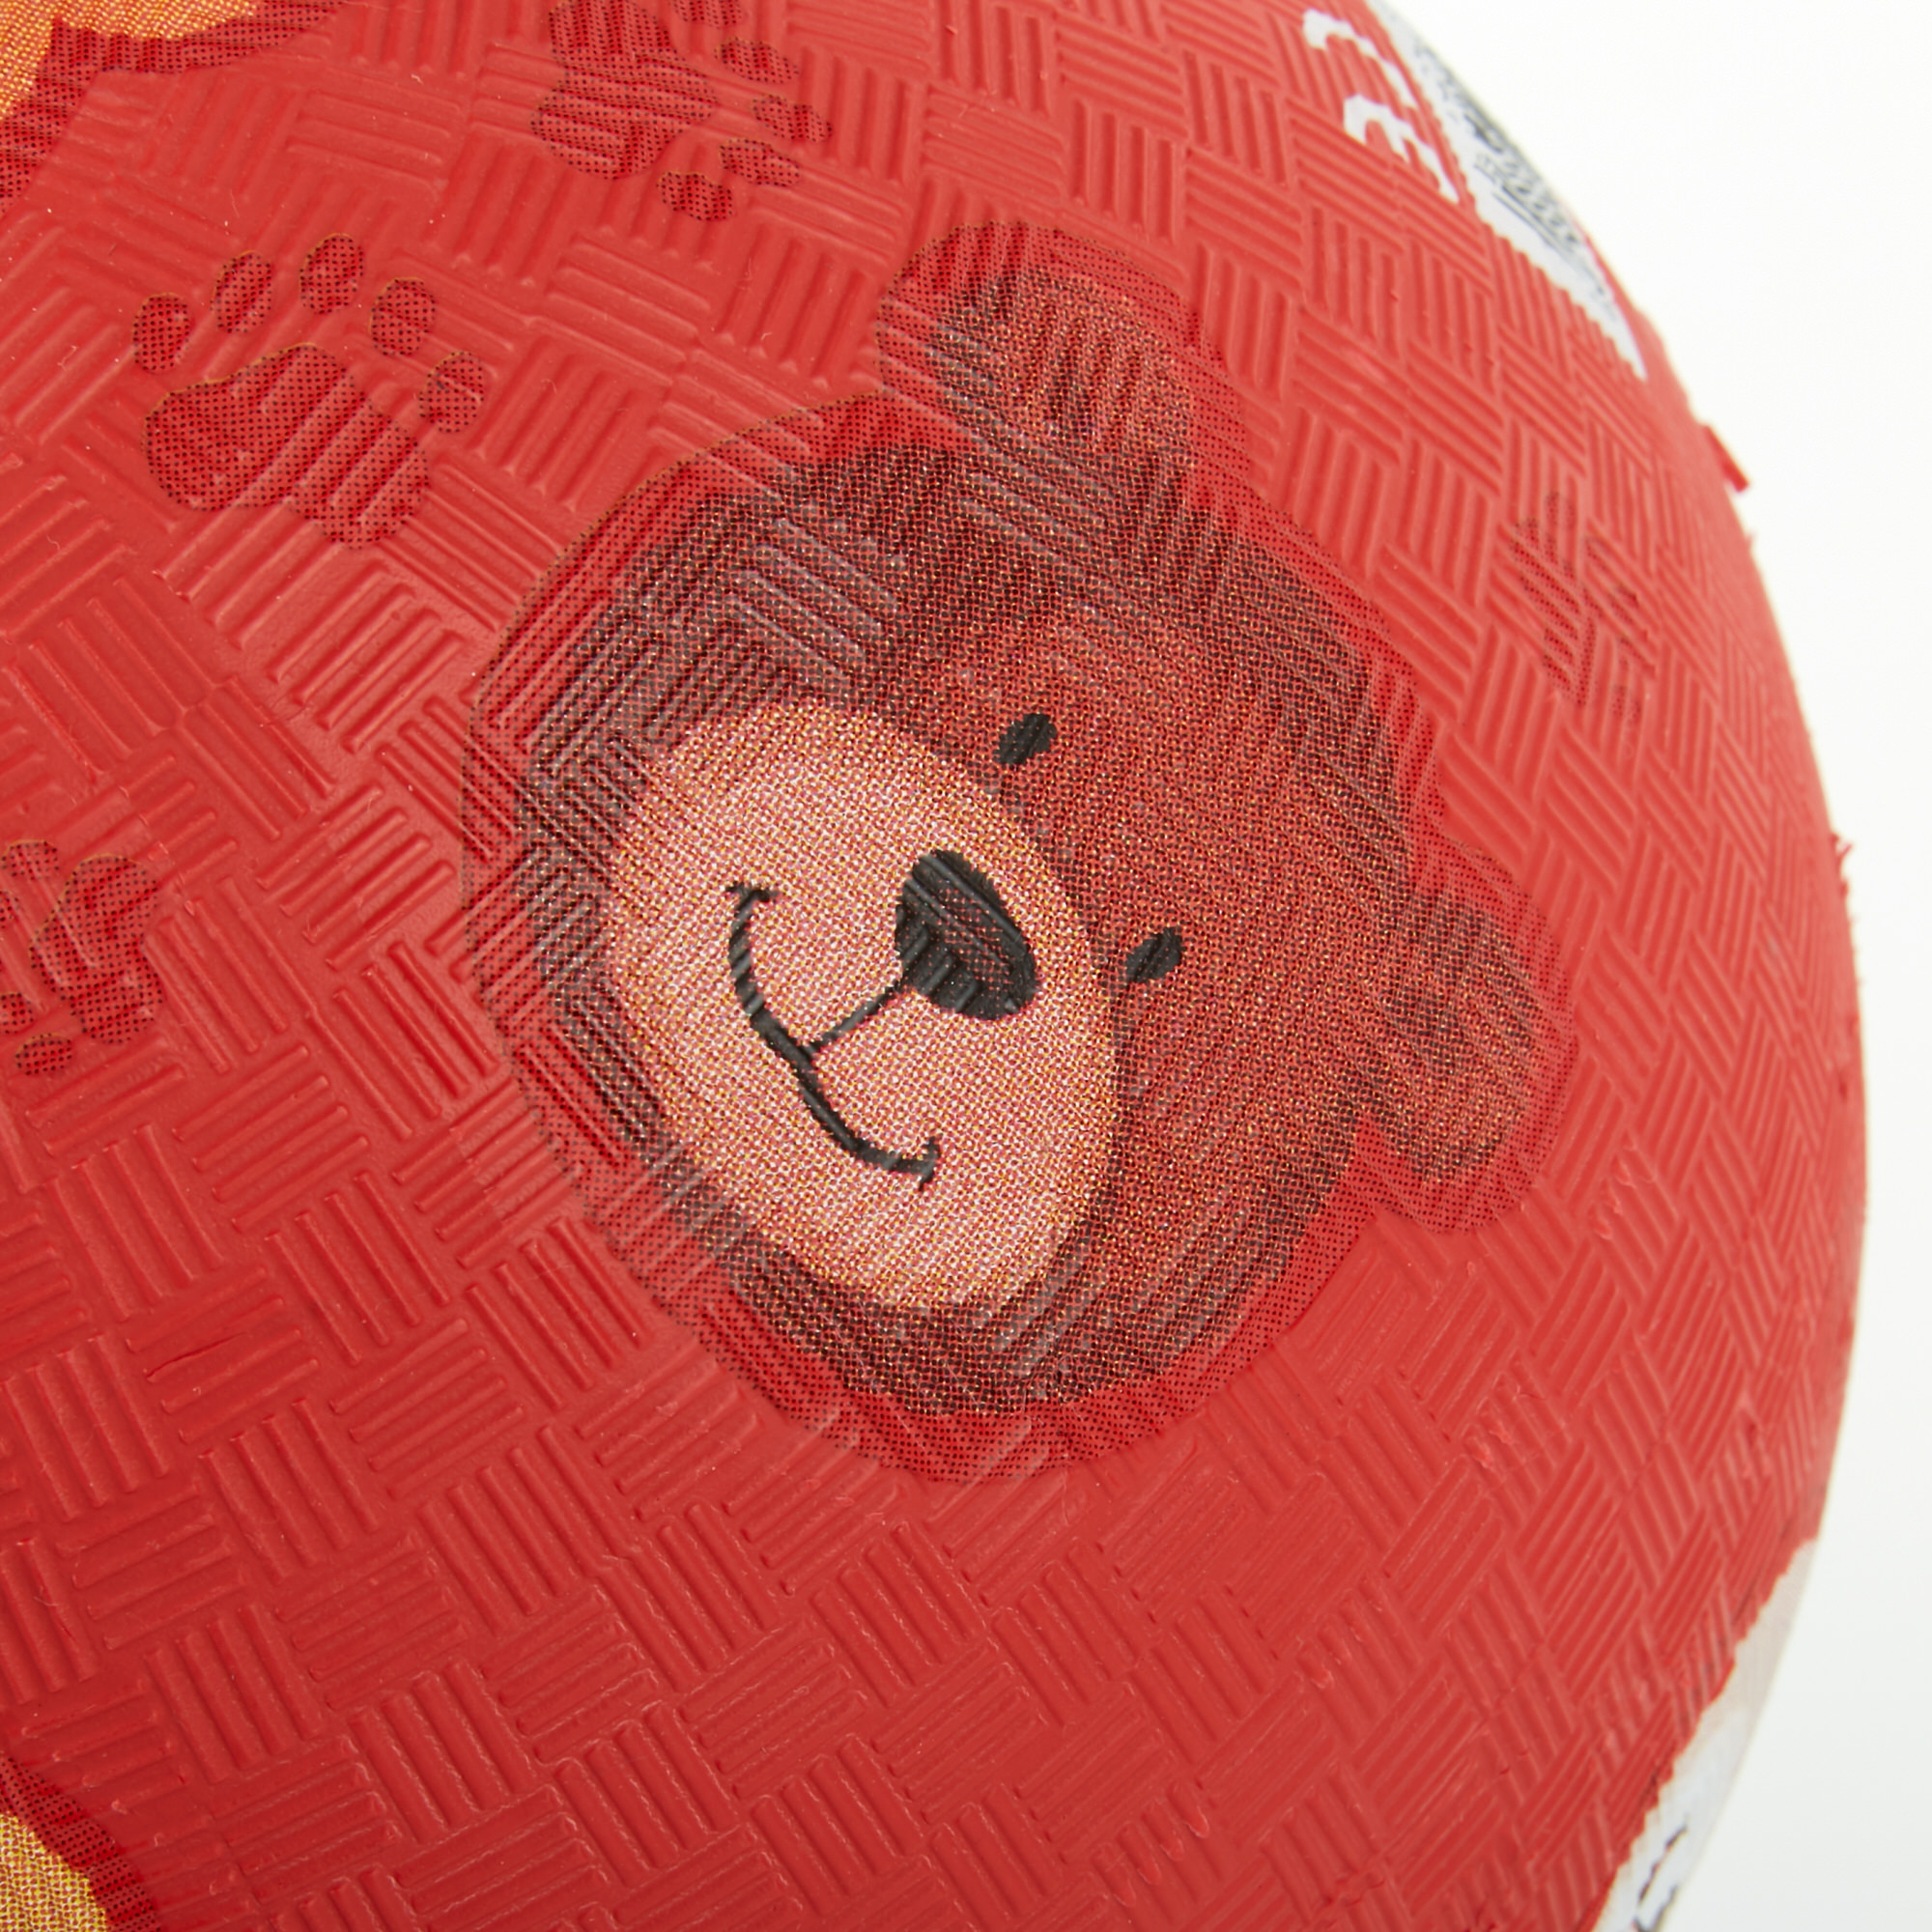 Rubber ball teddy bears, red